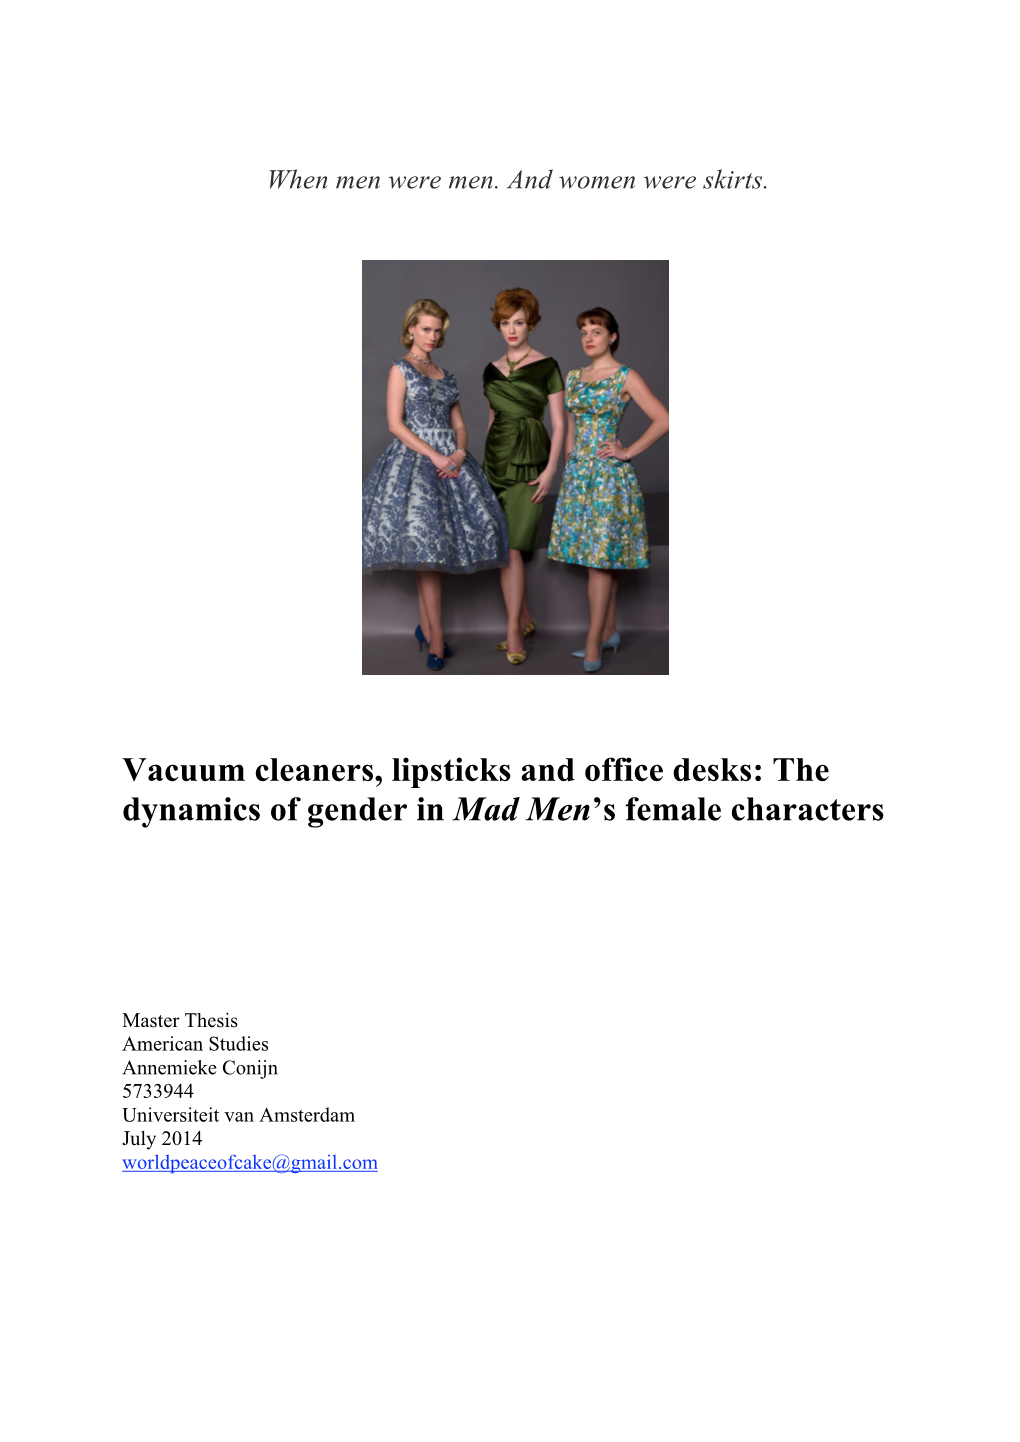 The Dynamics of Gender in Mad Men's Female Characters